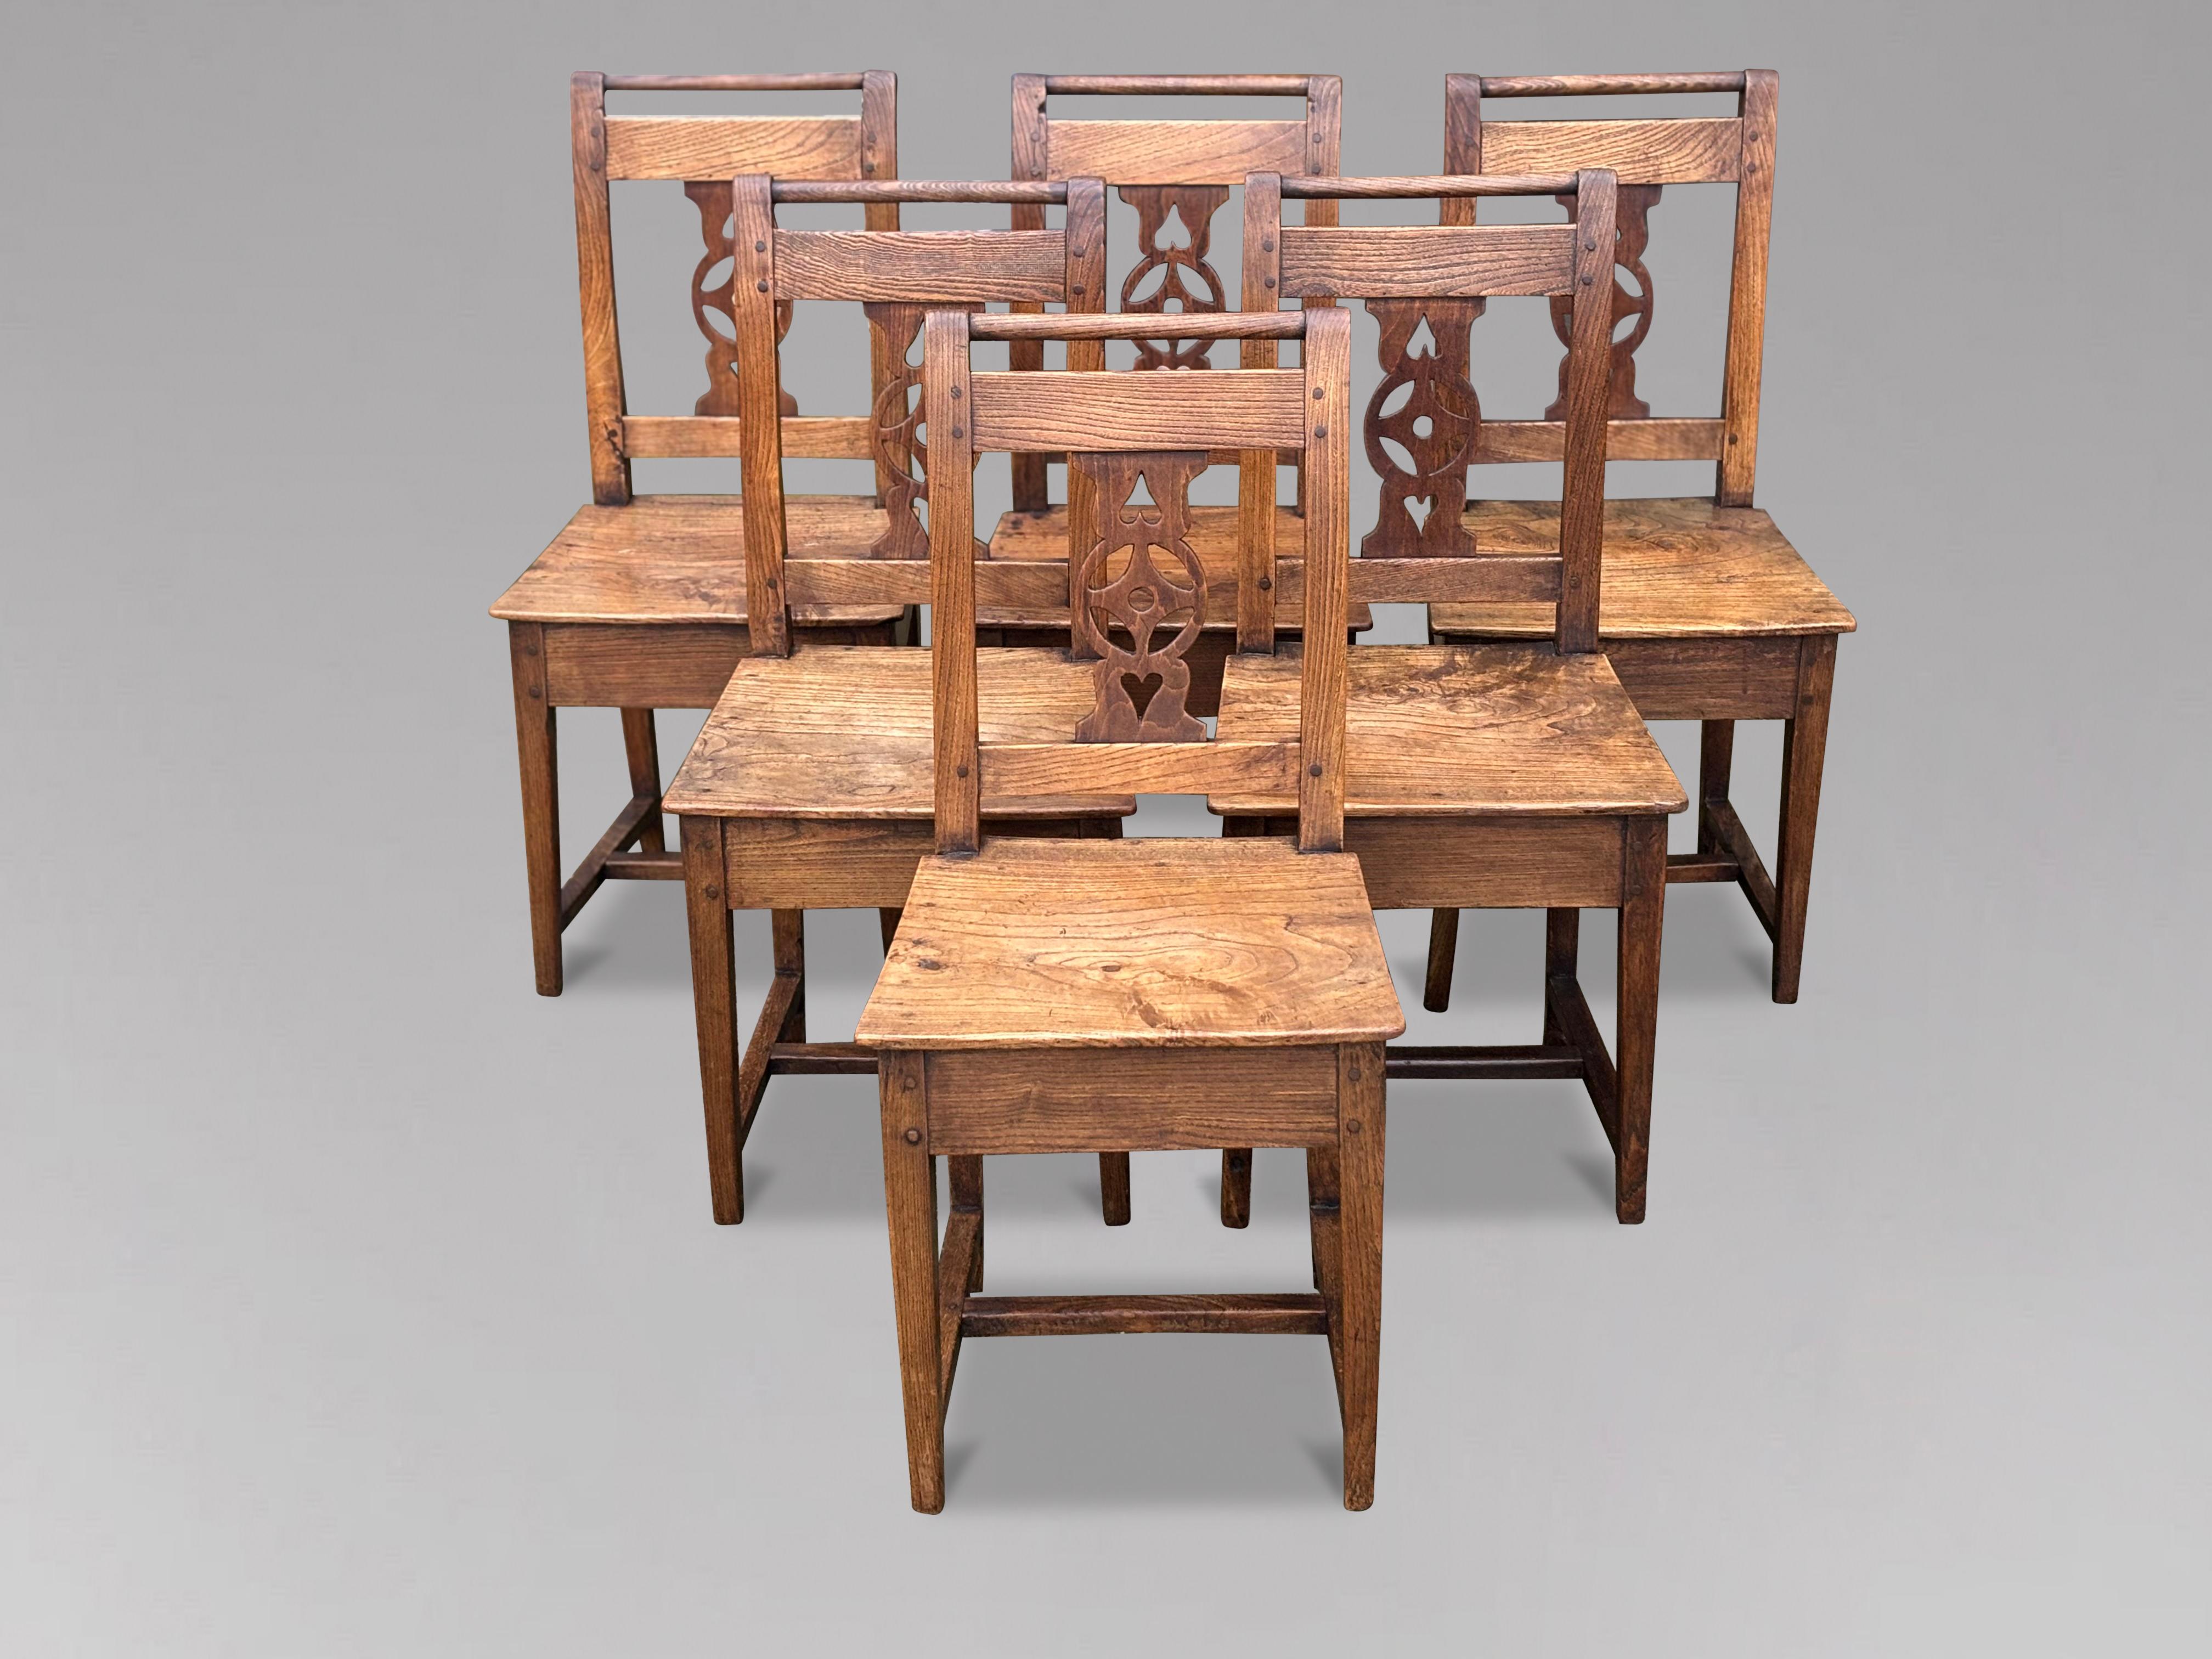 An attractive set of early 19th century, Georgian, six antique yew wood farmhouse kitchen chairs. The antique chairs each have shaped backrests with decoratively cut central splats. These antique farmhouse chairs have solid rectangular shaped seats